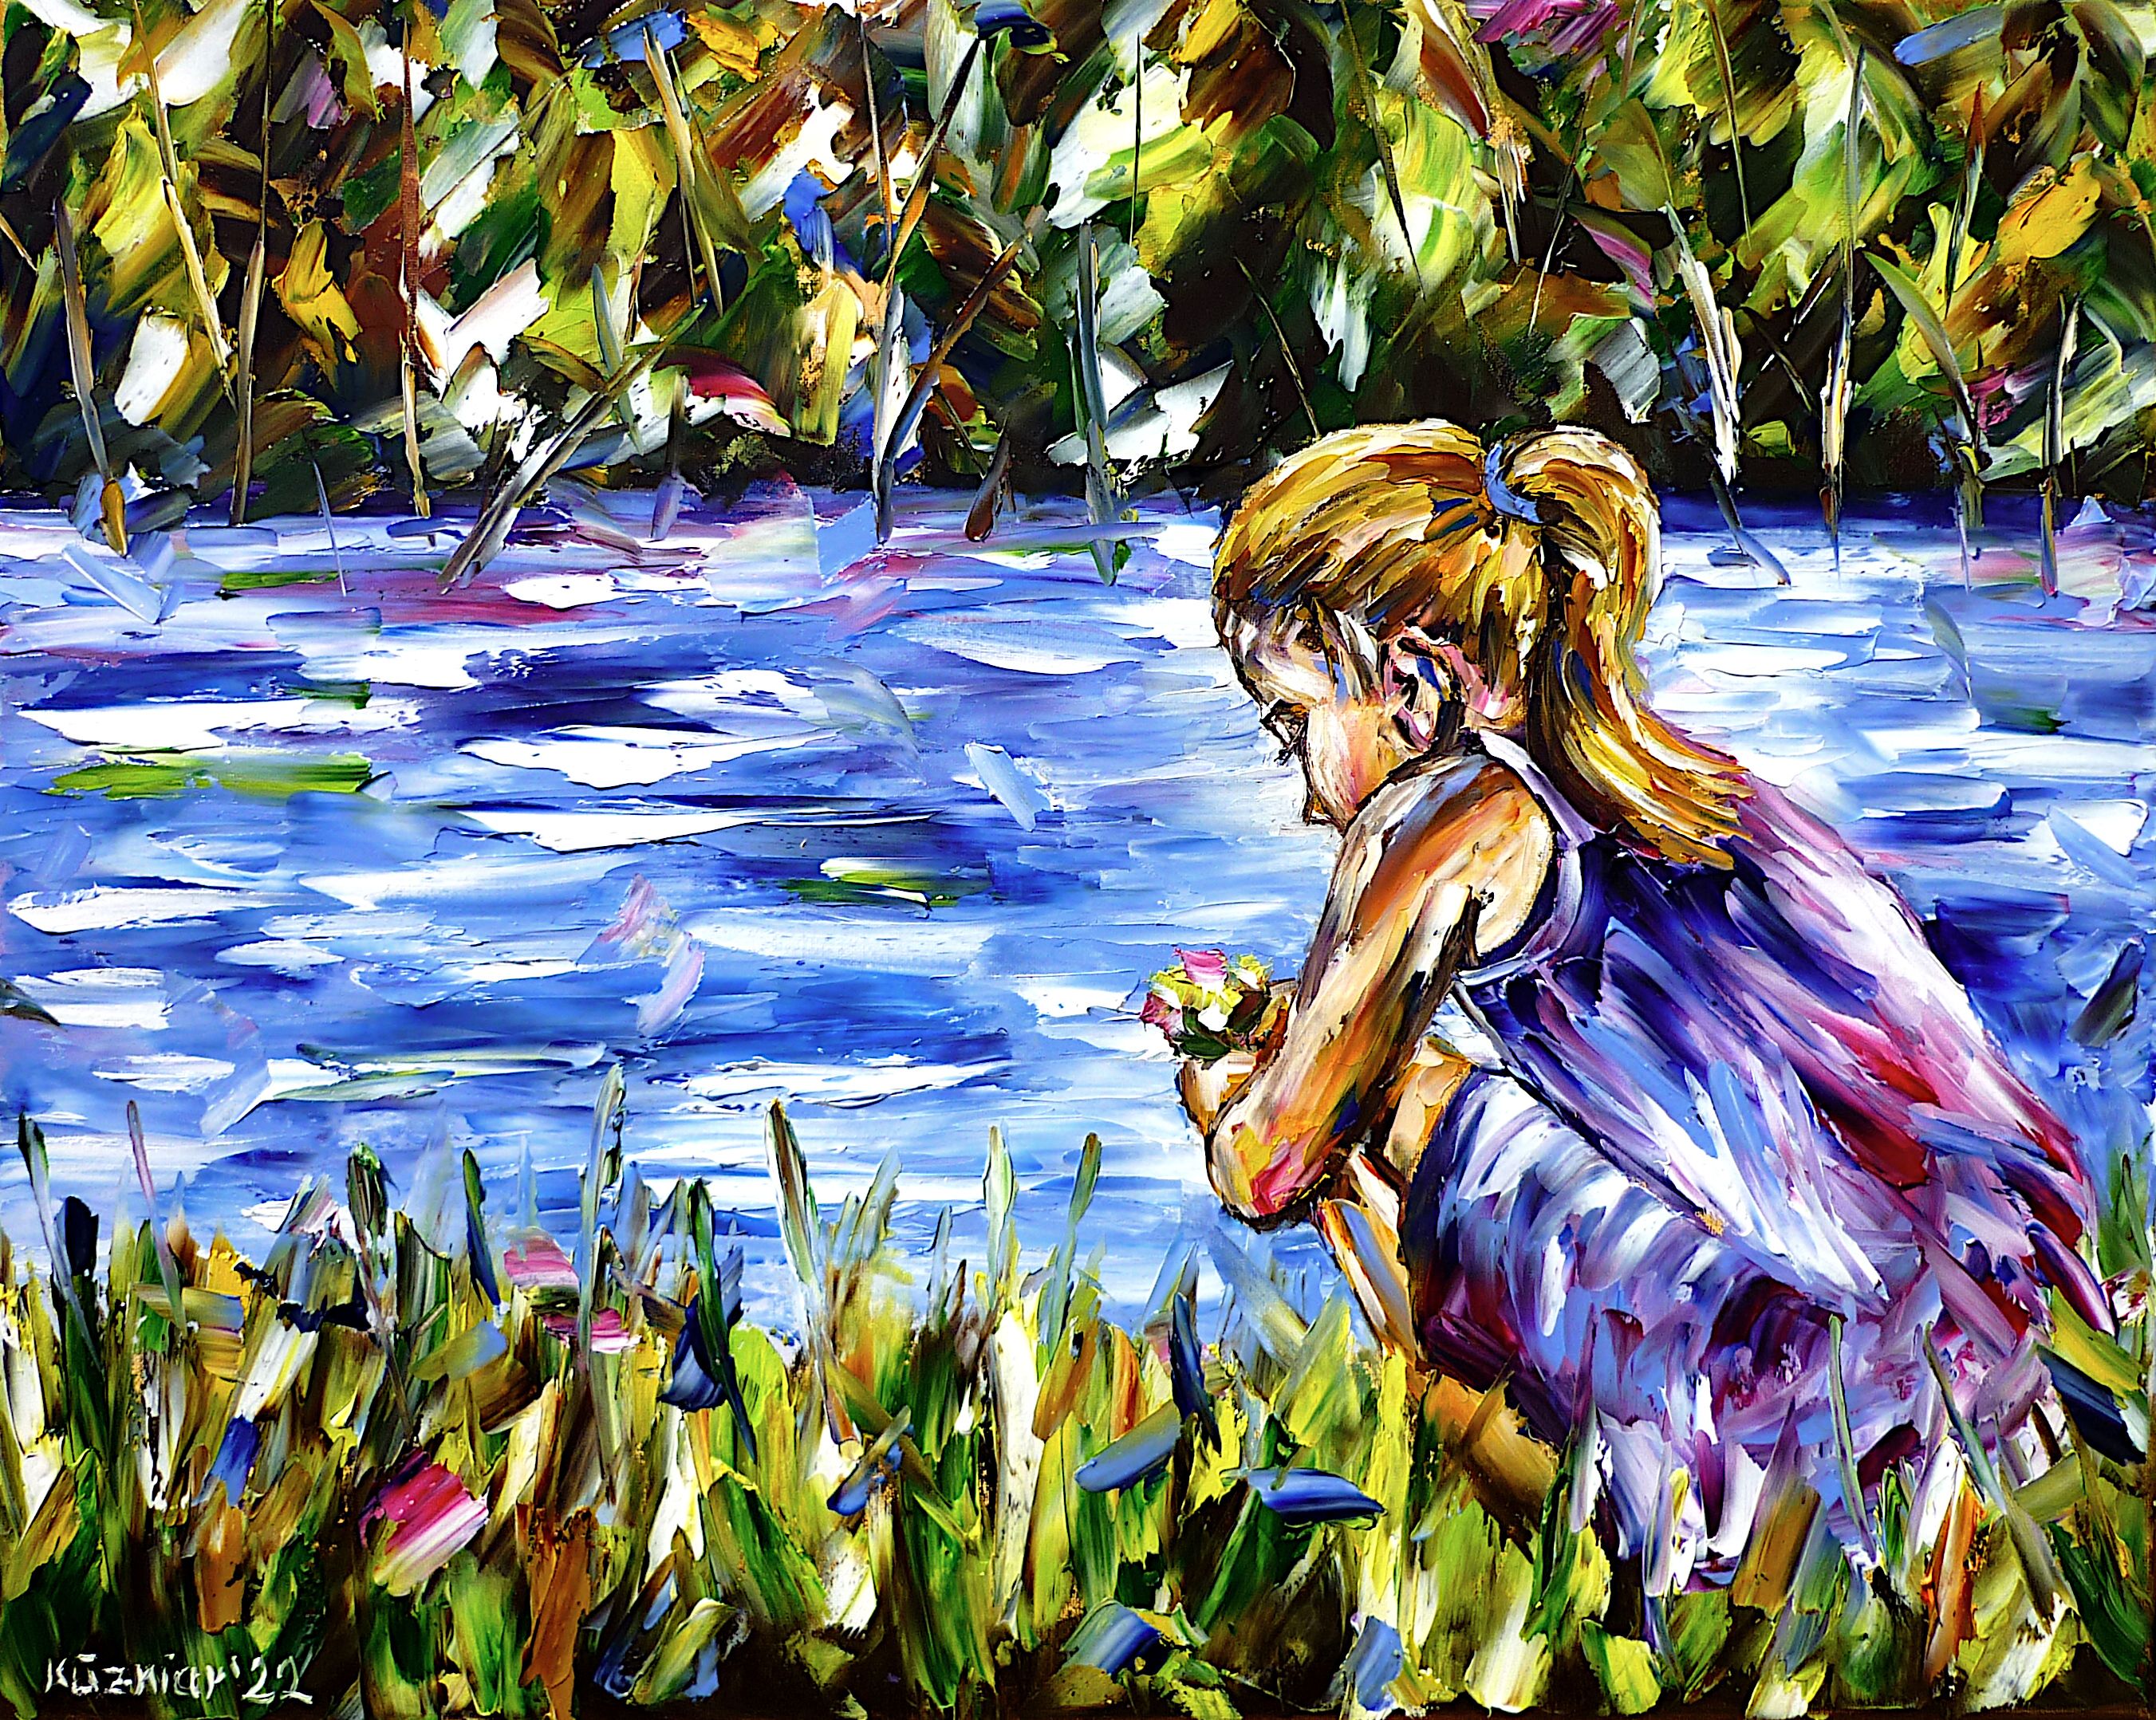 little girl,young girl,blonde girl,girl by the water,playing by the water,playing by the river,child on the riverbank,child by the water,girl with flowers,child with flowers,picking flowers,river landscape,child in nature,child in the landscape,child in the countryside,playing in nature,on the riverbank,children painting,children's picture,child painting,beautiful childhood,happy childhood,children's life,happy child,sitting by the river,children's love,playing child,children's heart,palette knife oil painting,modern art,impressionism,expressionism,abstract painting,lively colors,colorful painting,bright colors,light reflections,impasto painting,figurative